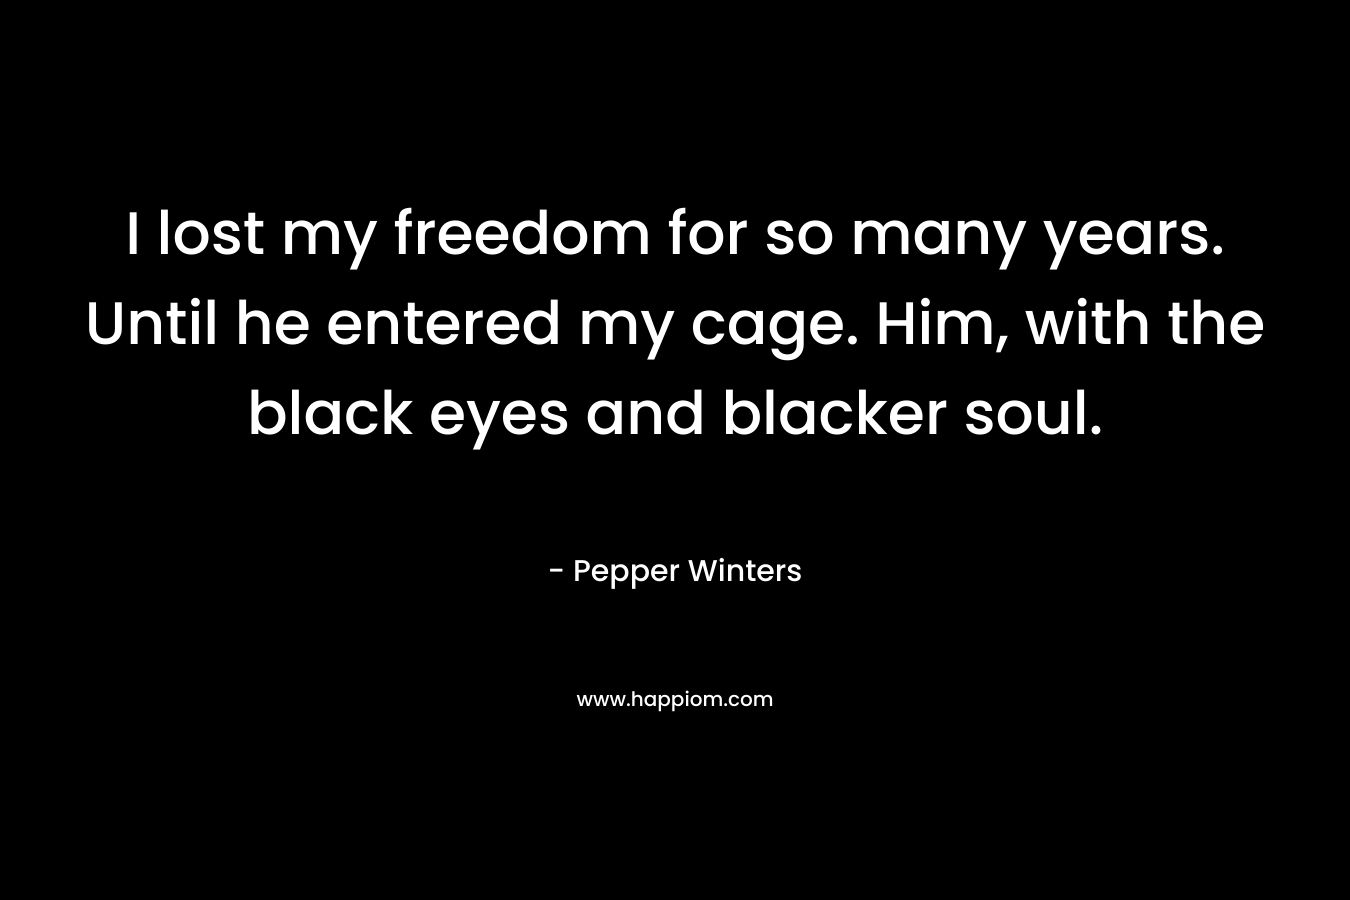 I lost my freedom for so many years. Until he entered my cage. Him, with the black eyes and blacker soul.